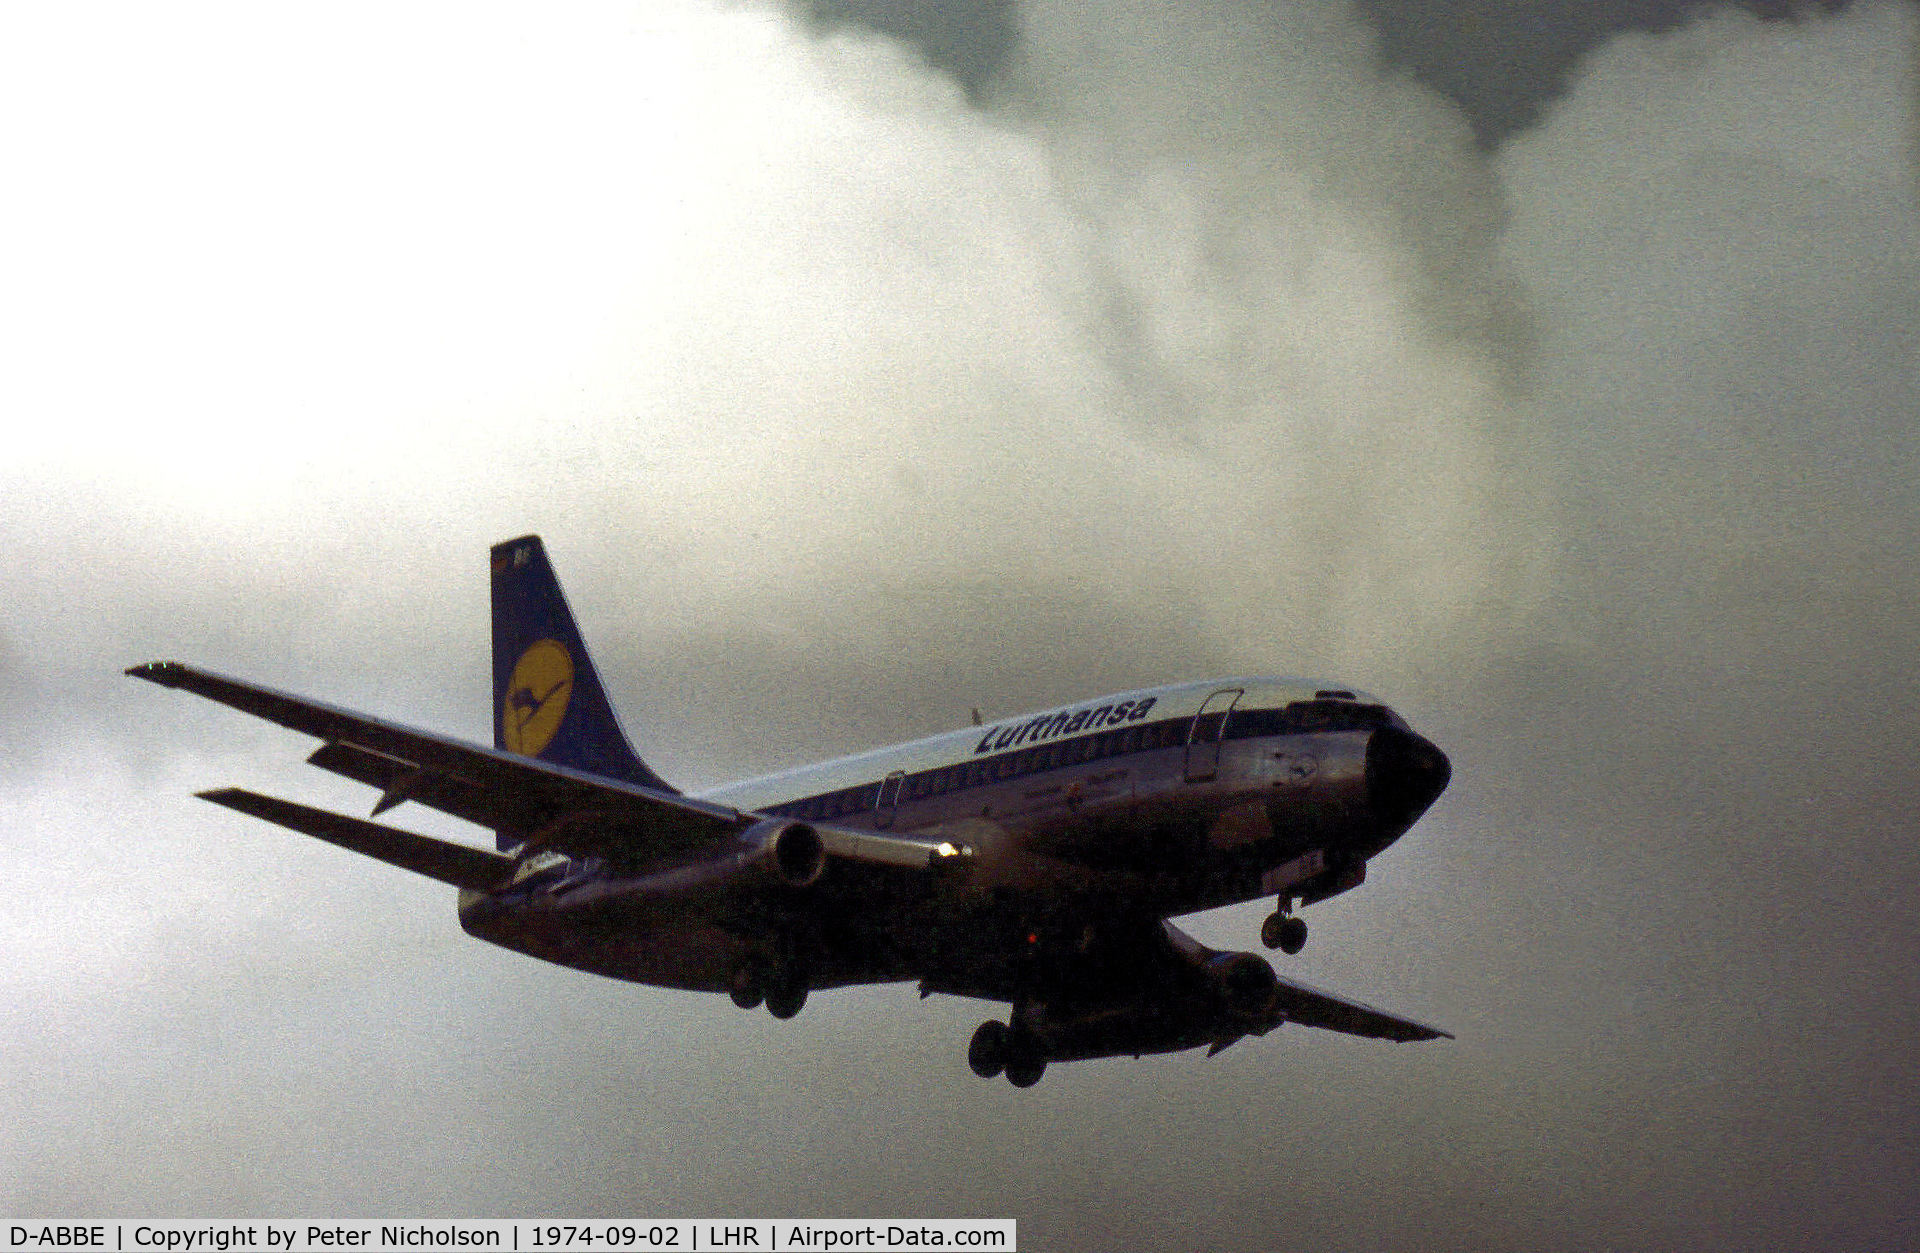 D-ABBE, 1969 Boeing 737-230C C/N 20253, Lufthansa Boeing 737-230C on finals to London Heathrow in September 1974.